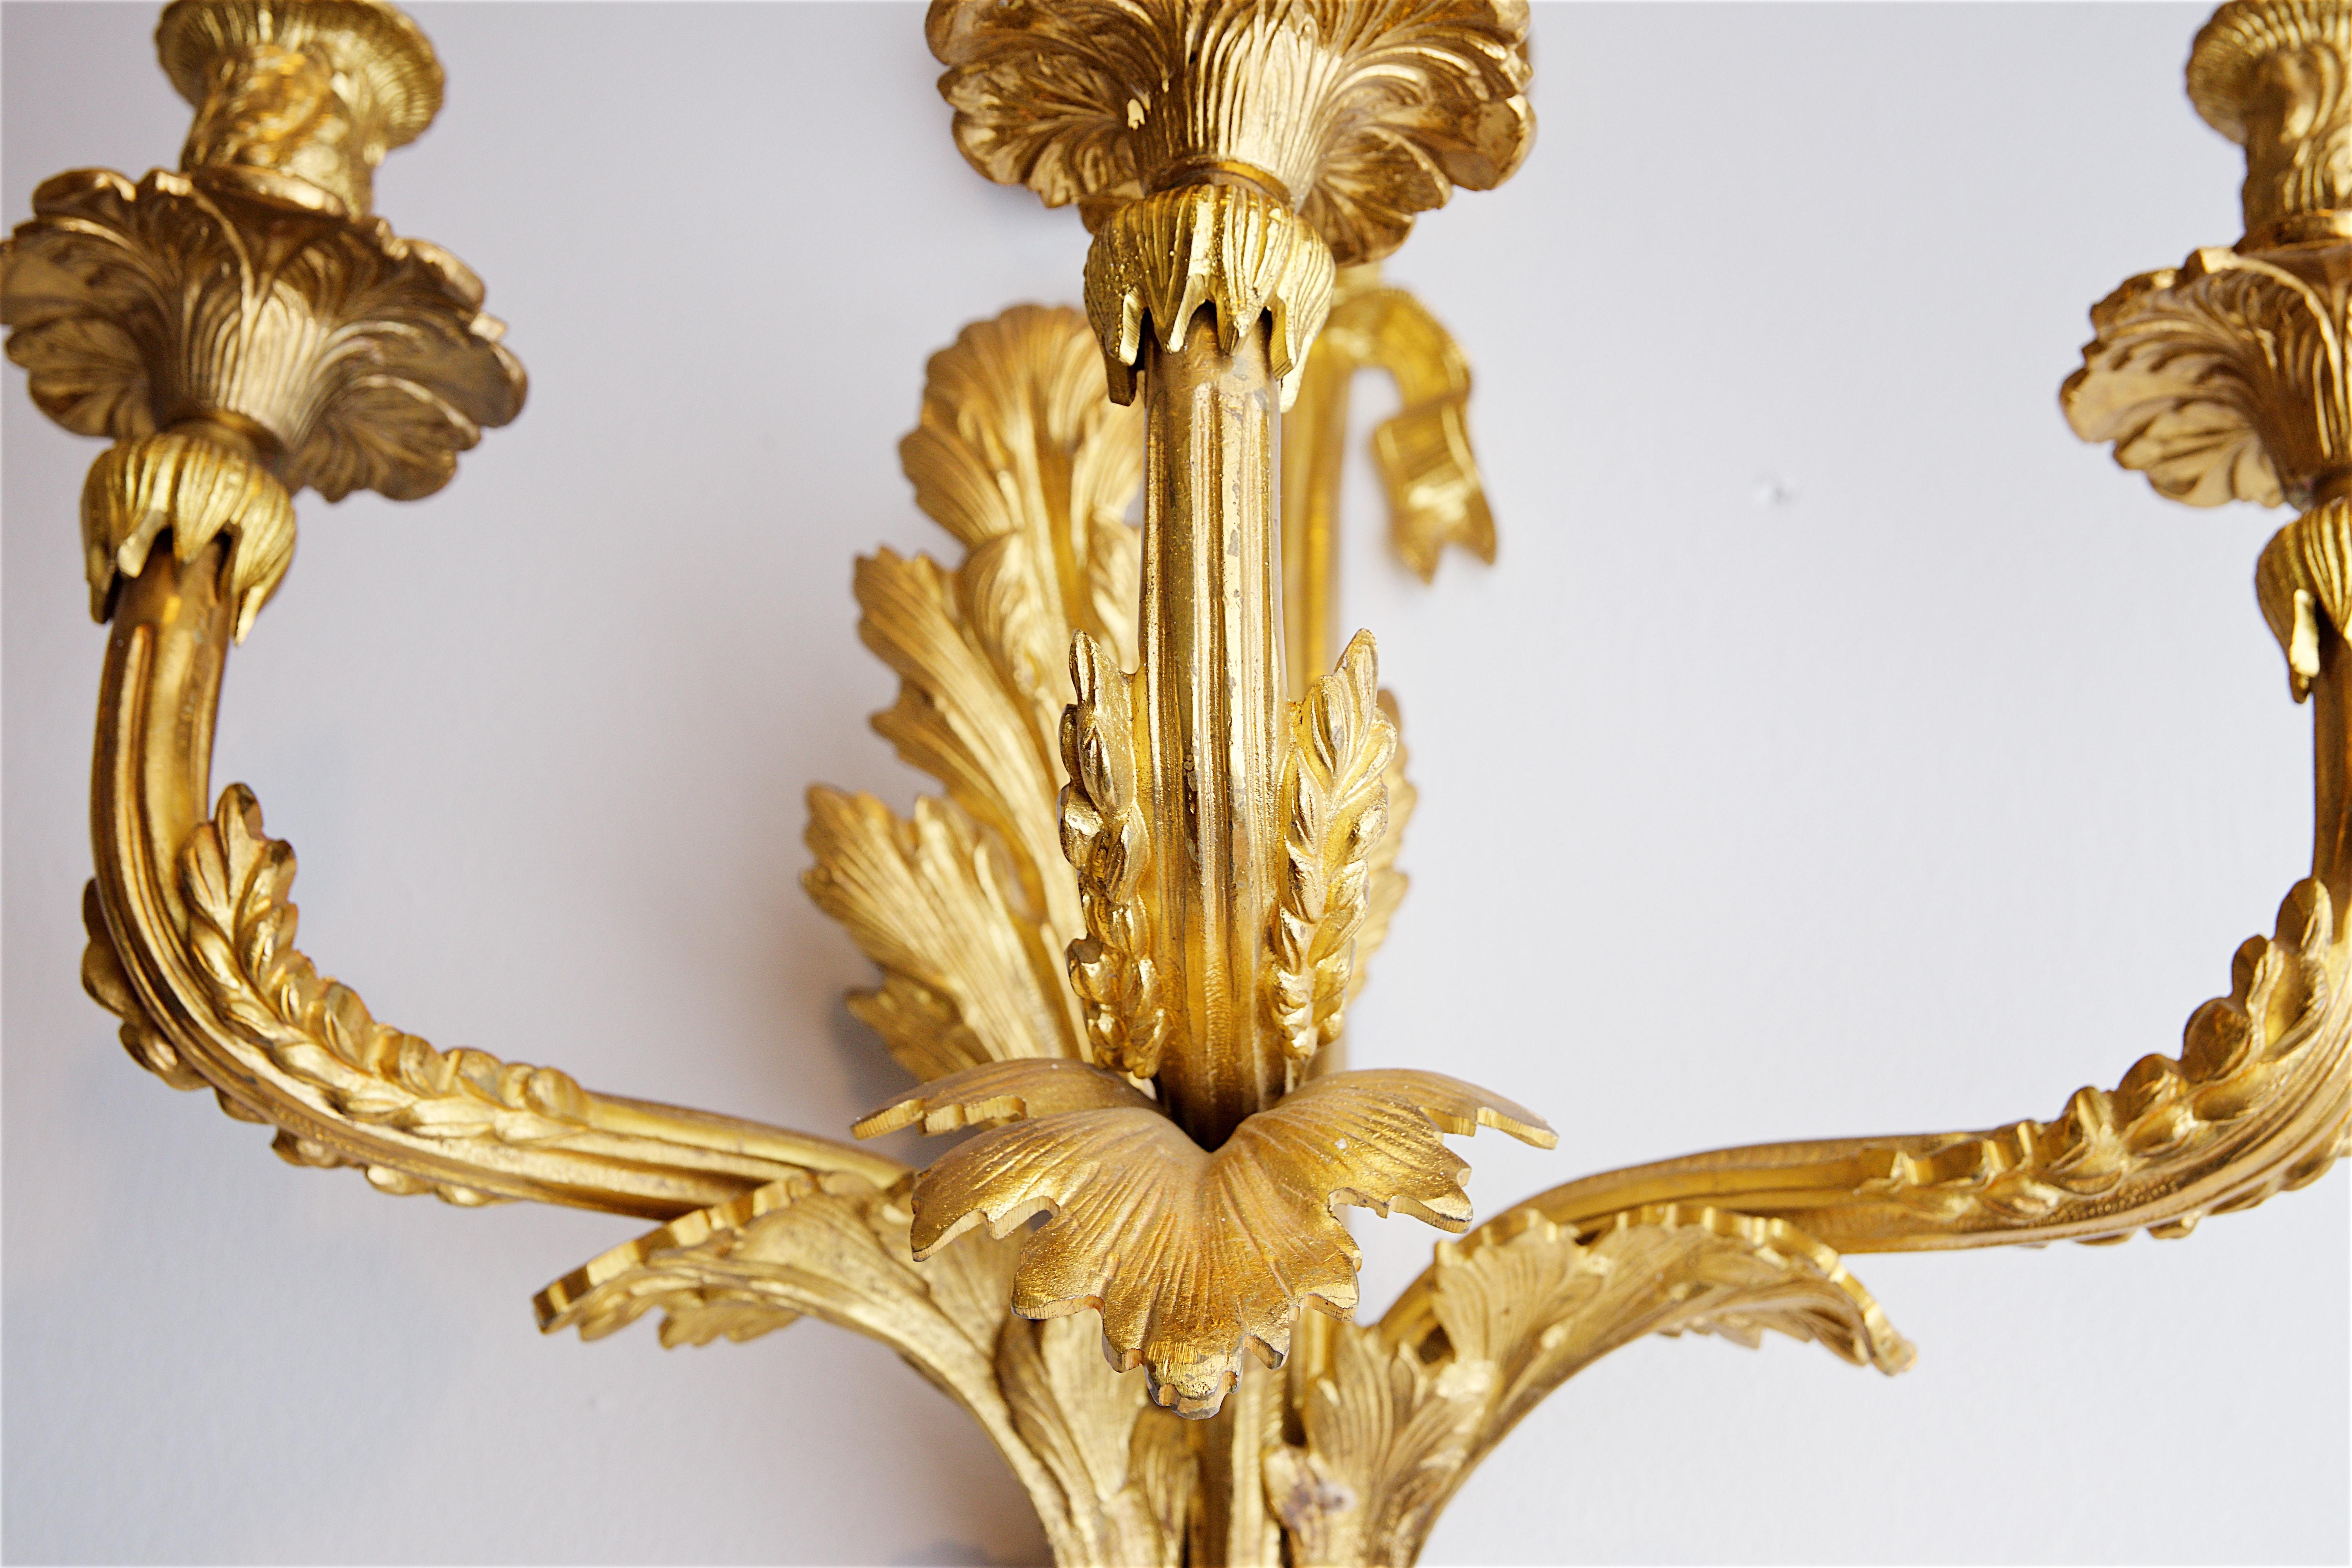 Pair of Mid-20th Century English Ormolu Wall-Mounted Candelabra For Sale 1